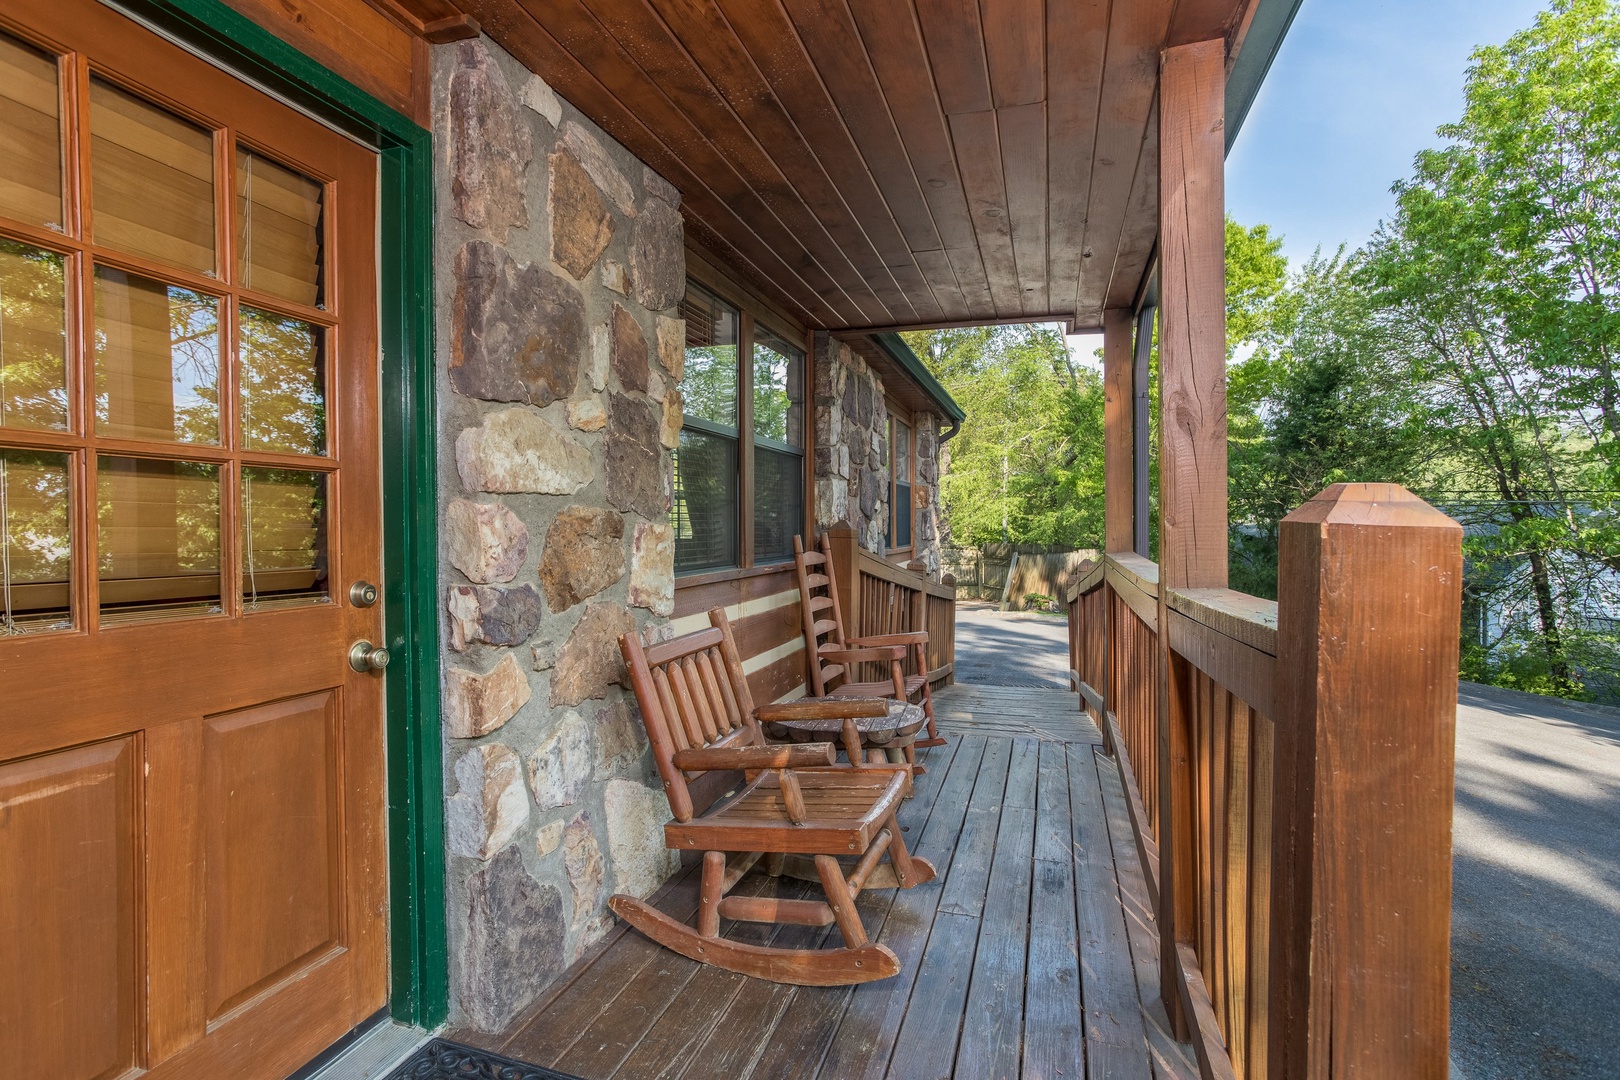 Covered front porch at Patriot Pointe, a 5 bedroom cabin rental located in Pigeon Forge